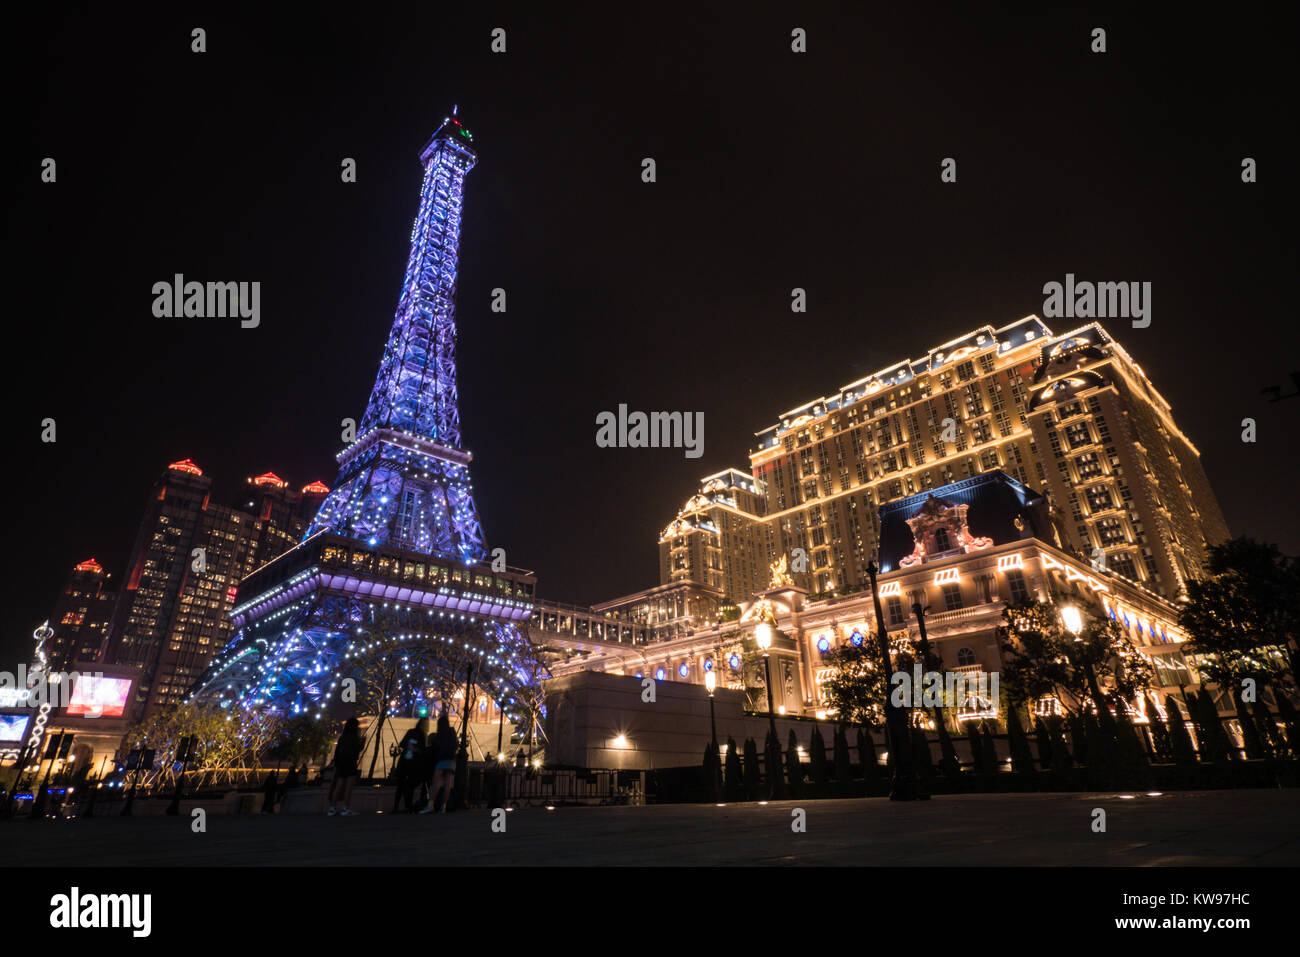 The Parisian Macao - French Flair And A Half-Sized Eiffel Tower